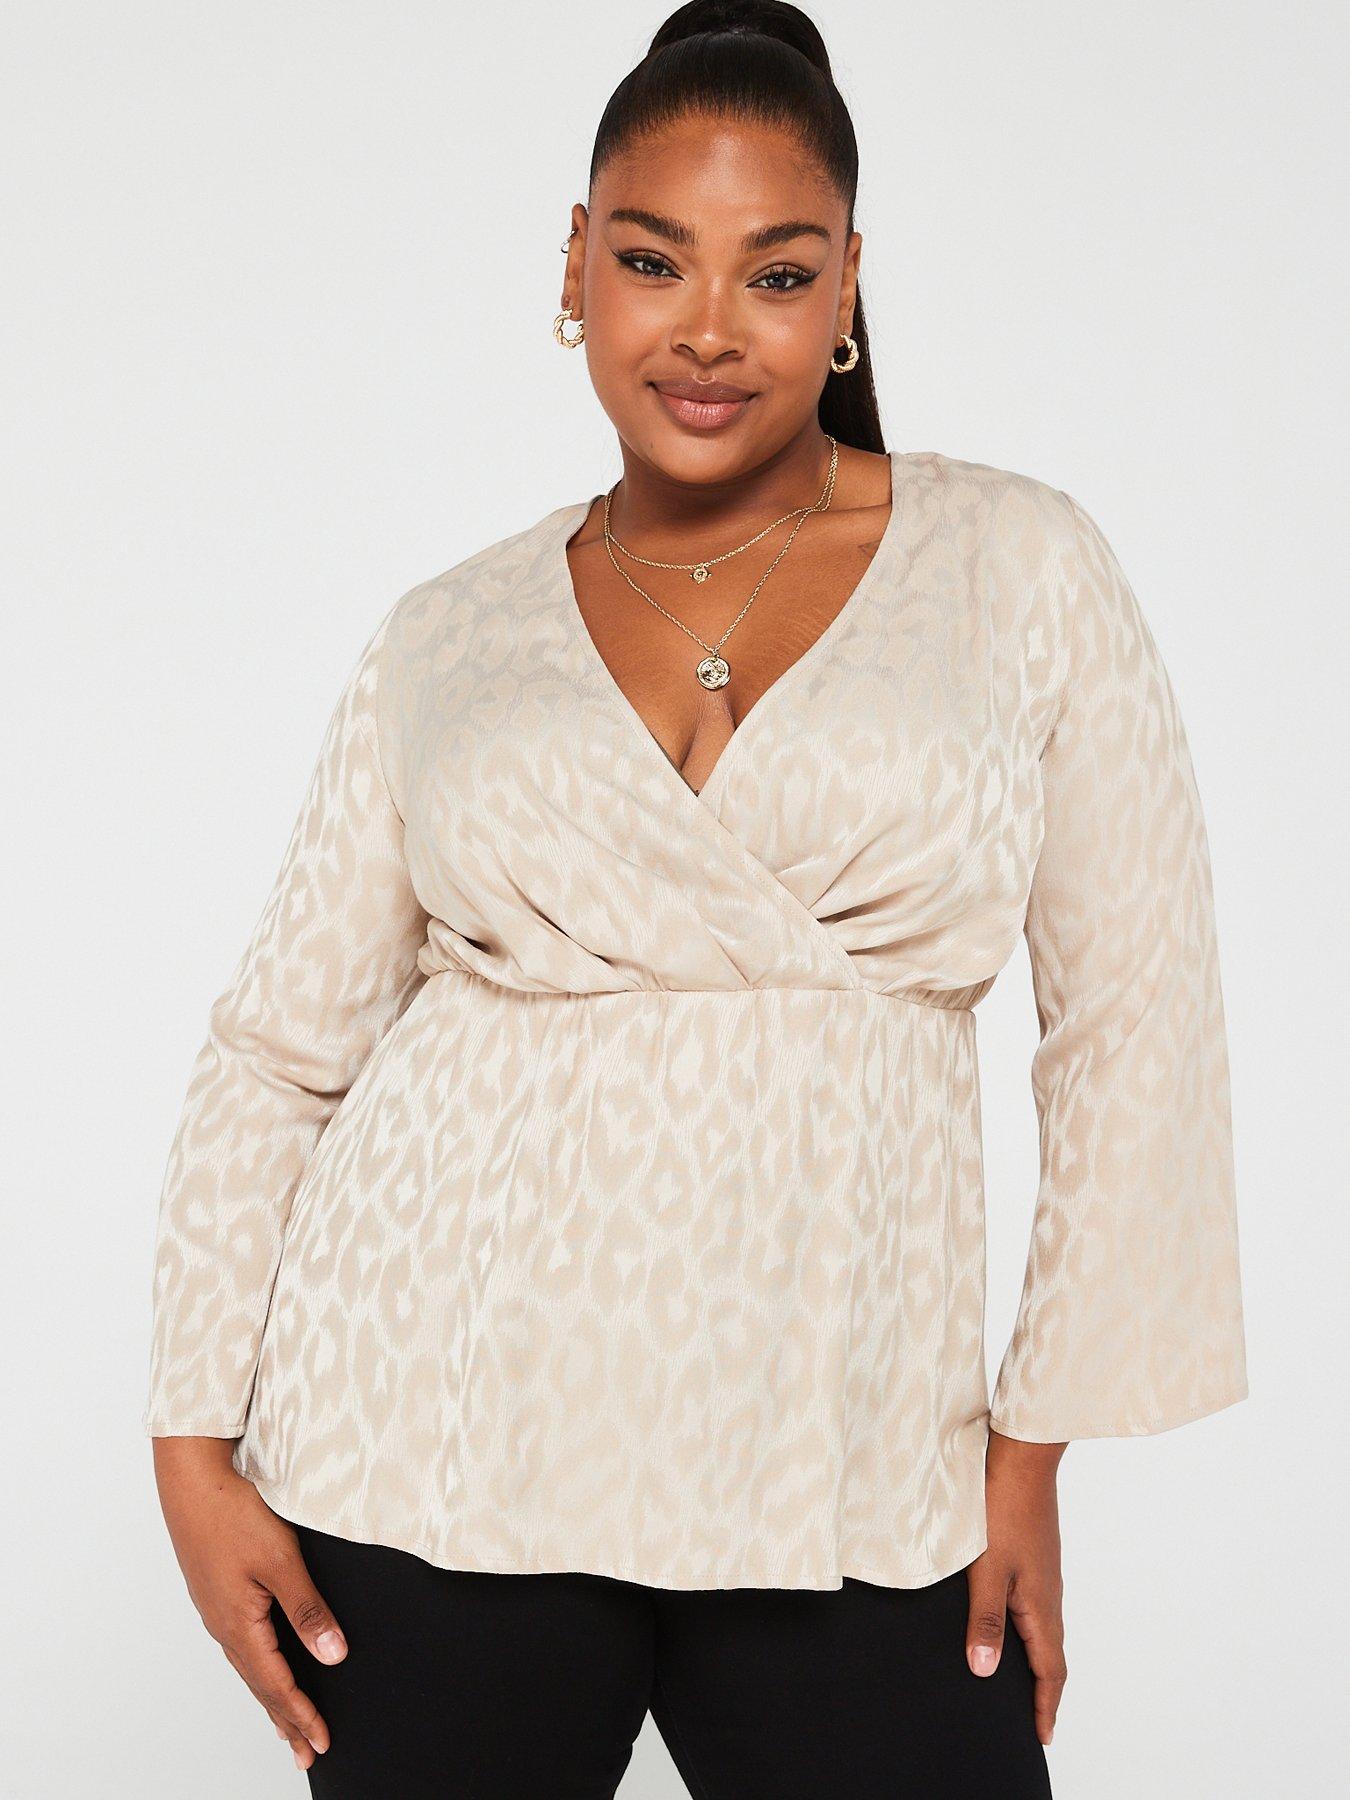 Plus Size Going Out & Party Tops